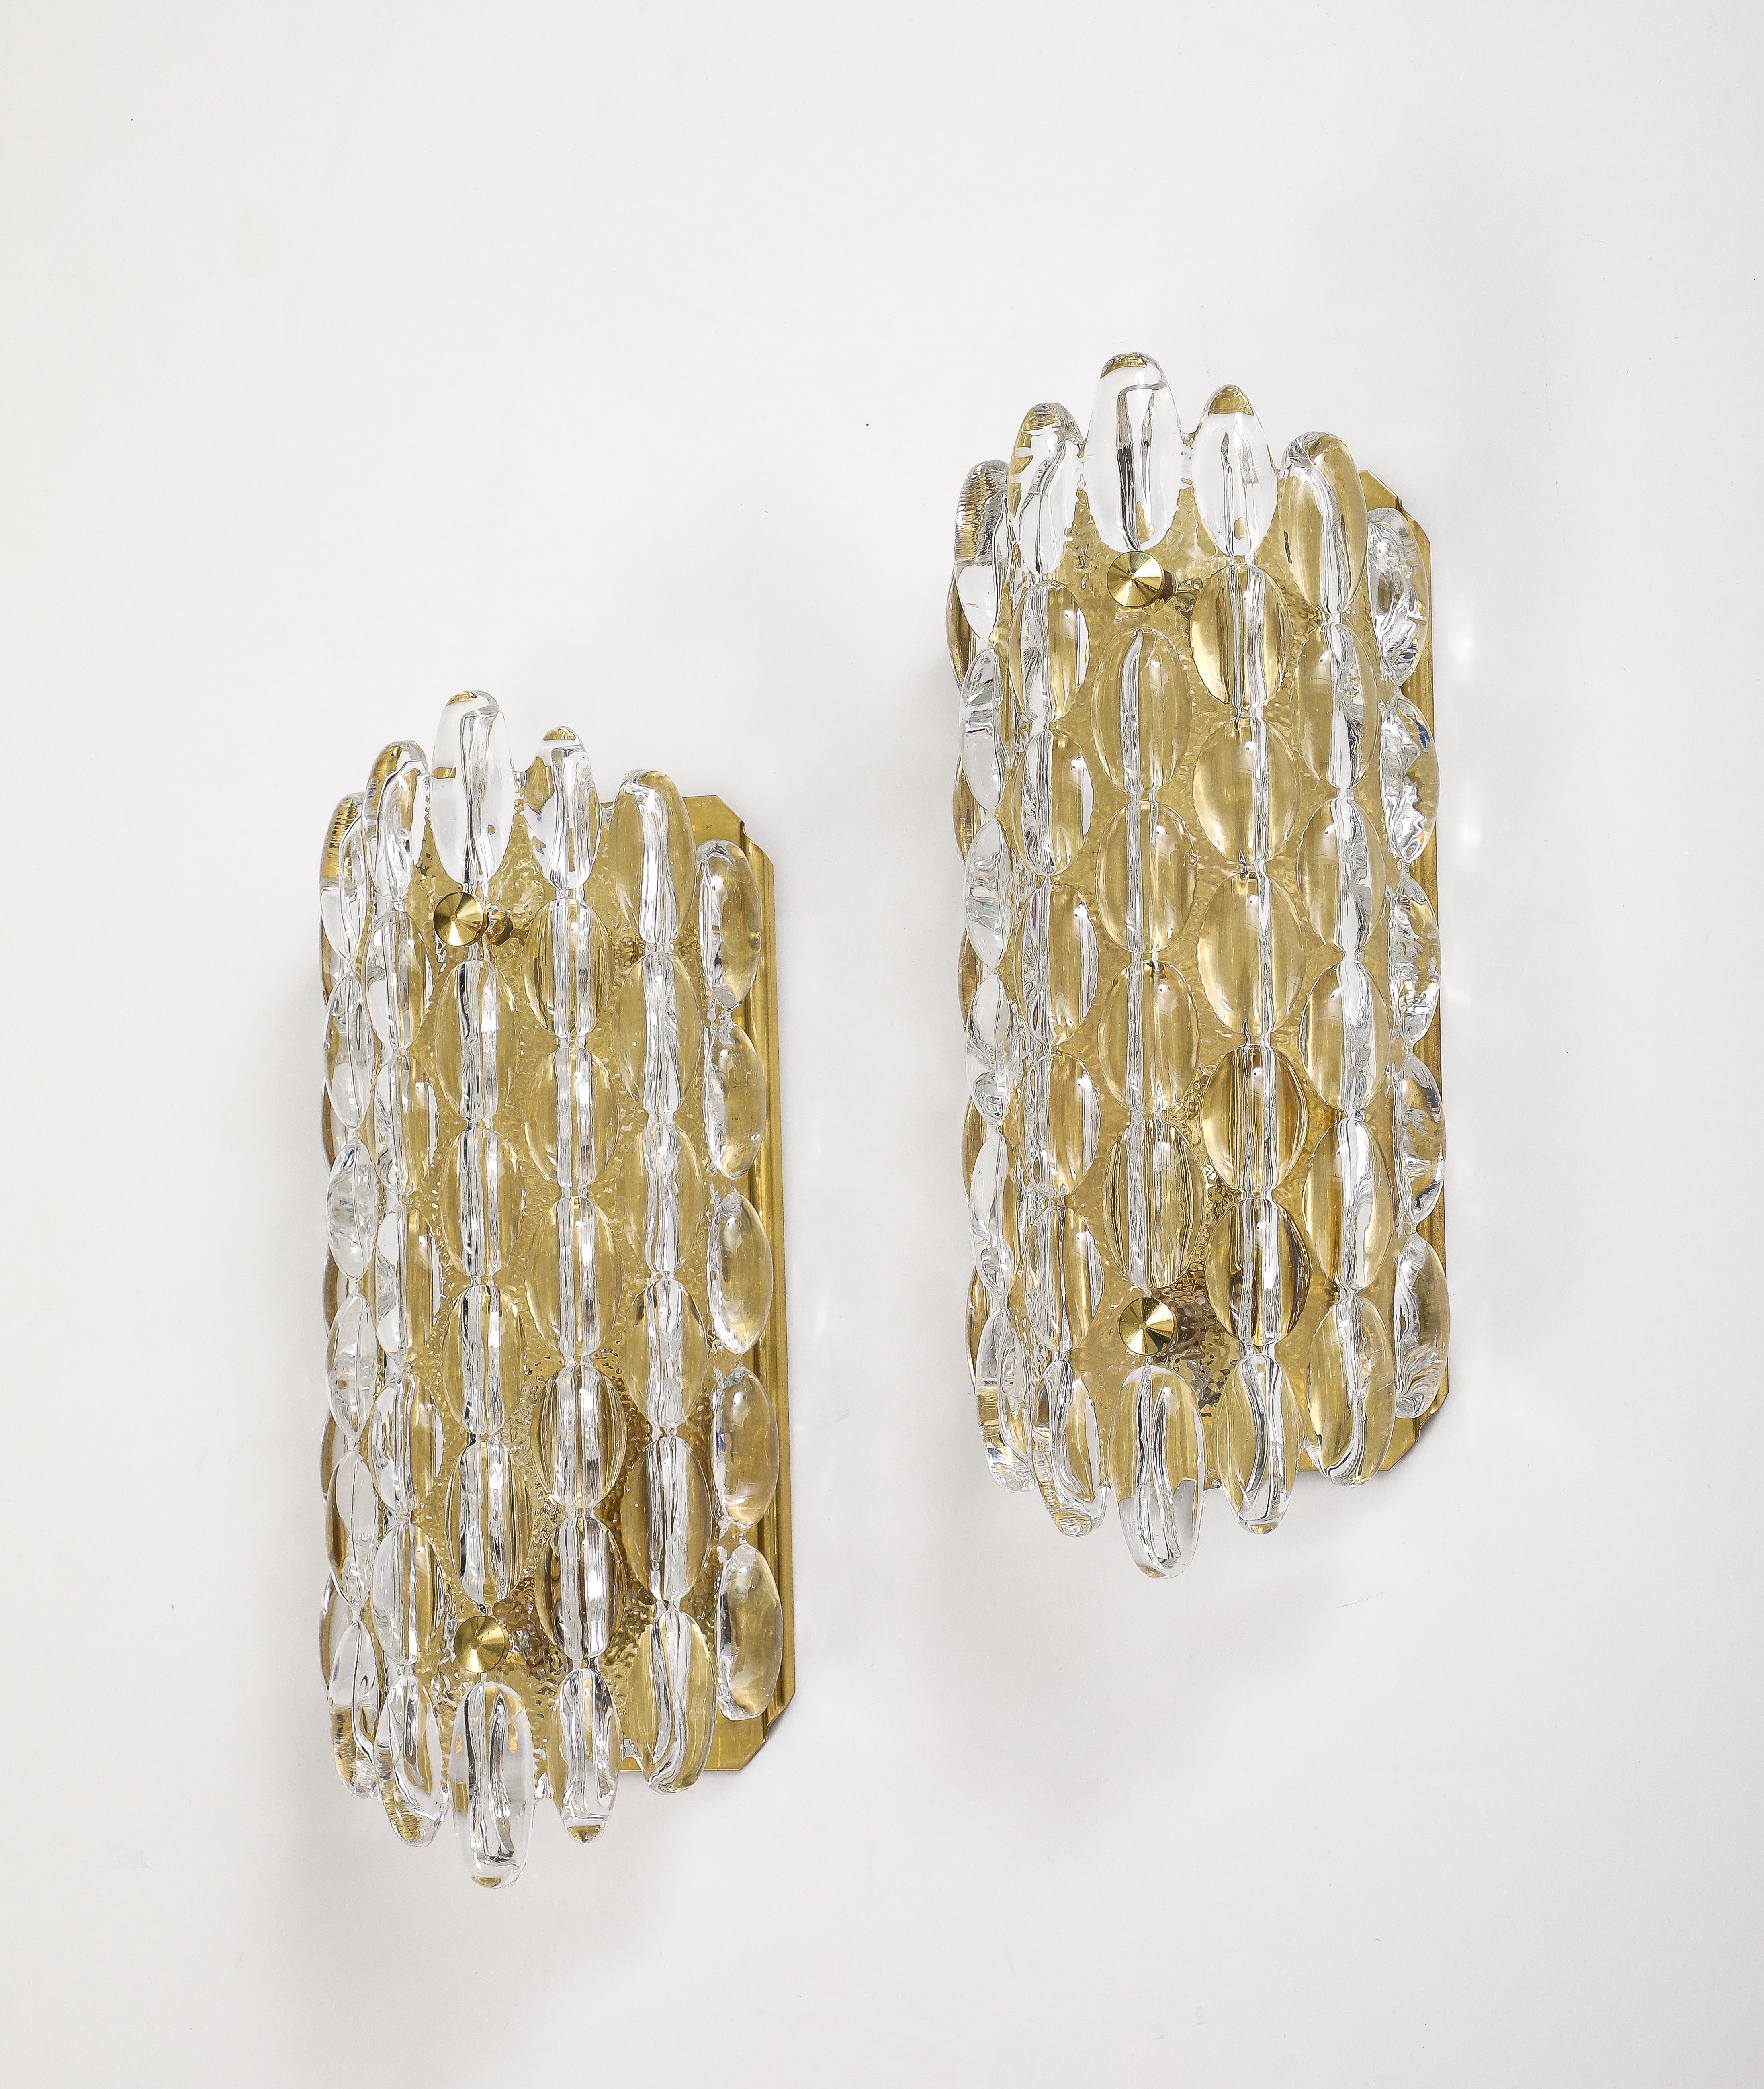 Pair of 1960's Crystal Bubble sconces designed by Carl Fagerlund for Orrefors.
The sconces have been Newly rewired for the US